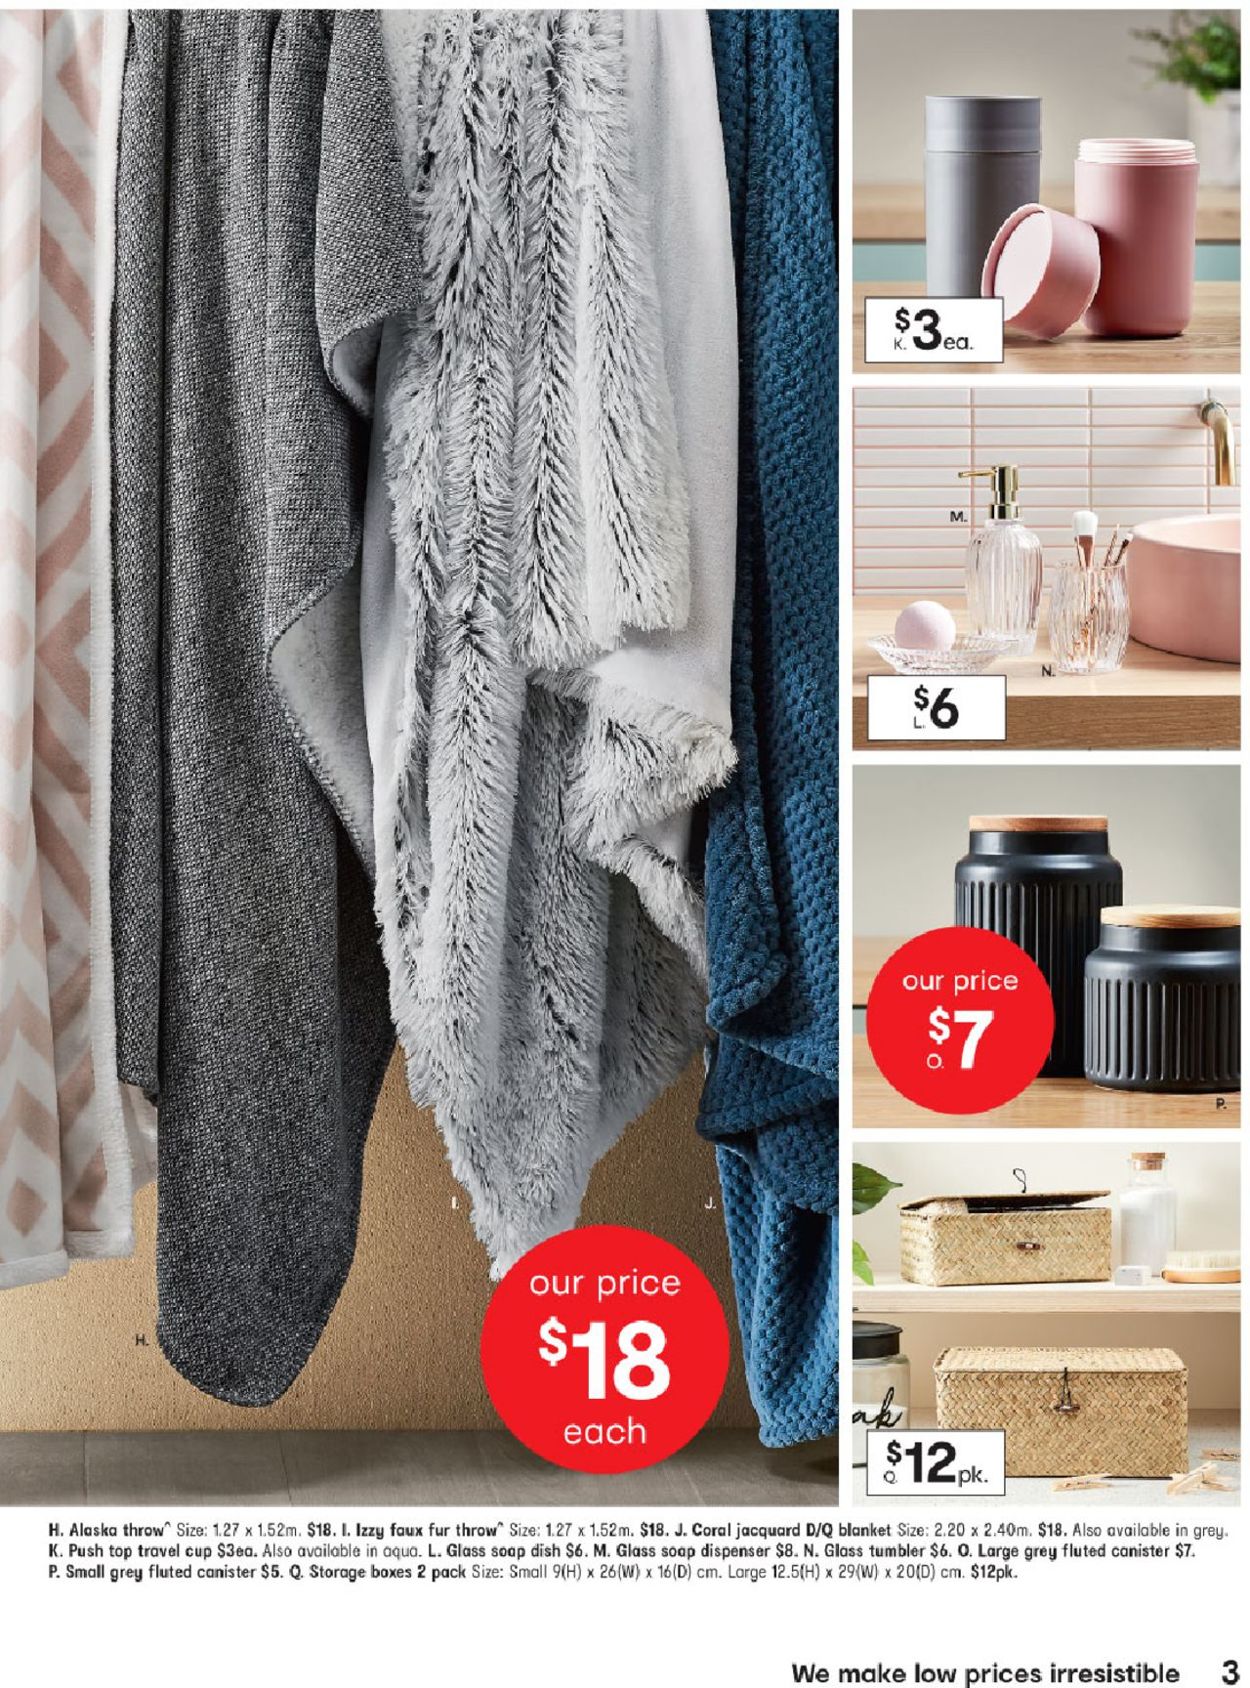 Kmart Catalogue from 16/05/2019